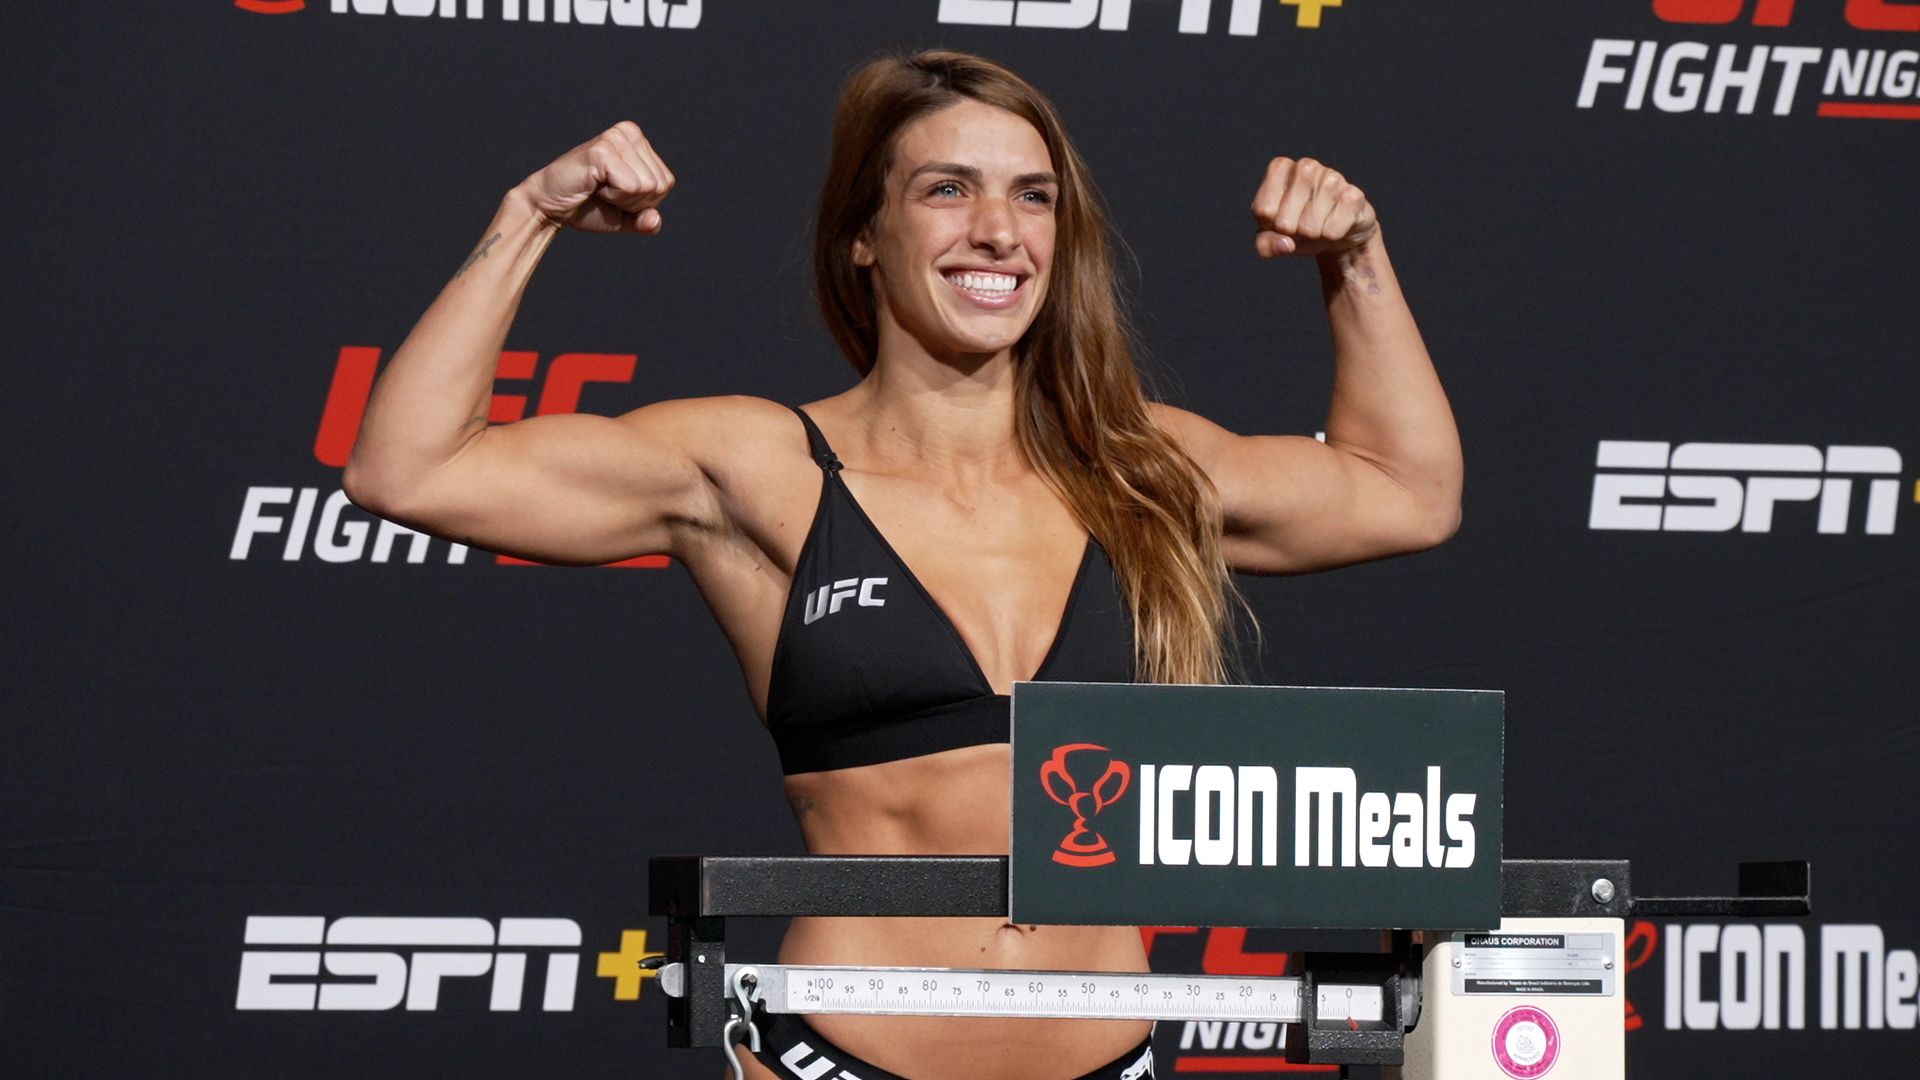 mackenzie dern nationality: What is the nationality of UFC